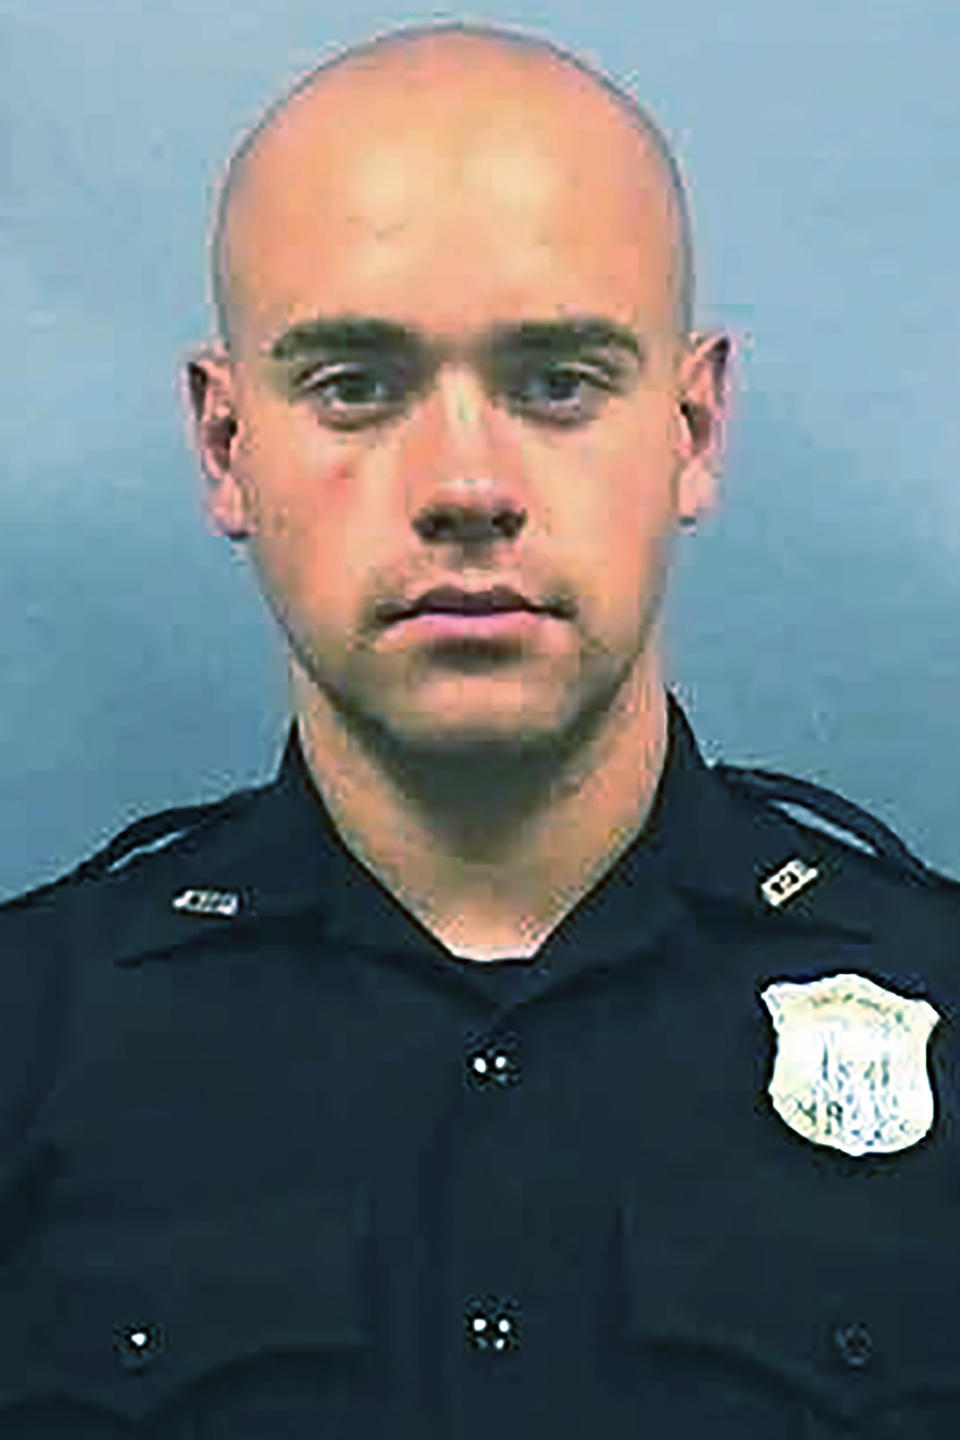 This undated photo provided by the Atlanta Police Department shows Officer Garrett Rolfe. Rolfe, who fatally shot Rayshard Brooks in the back after the fleeing man pointed a stun gun in his direction, was charged with felony murder and 10 other charges, announced Wednesday, June 17, 2020. Rolfe was fired after the shooting. (Atlanta Police Department via AP)